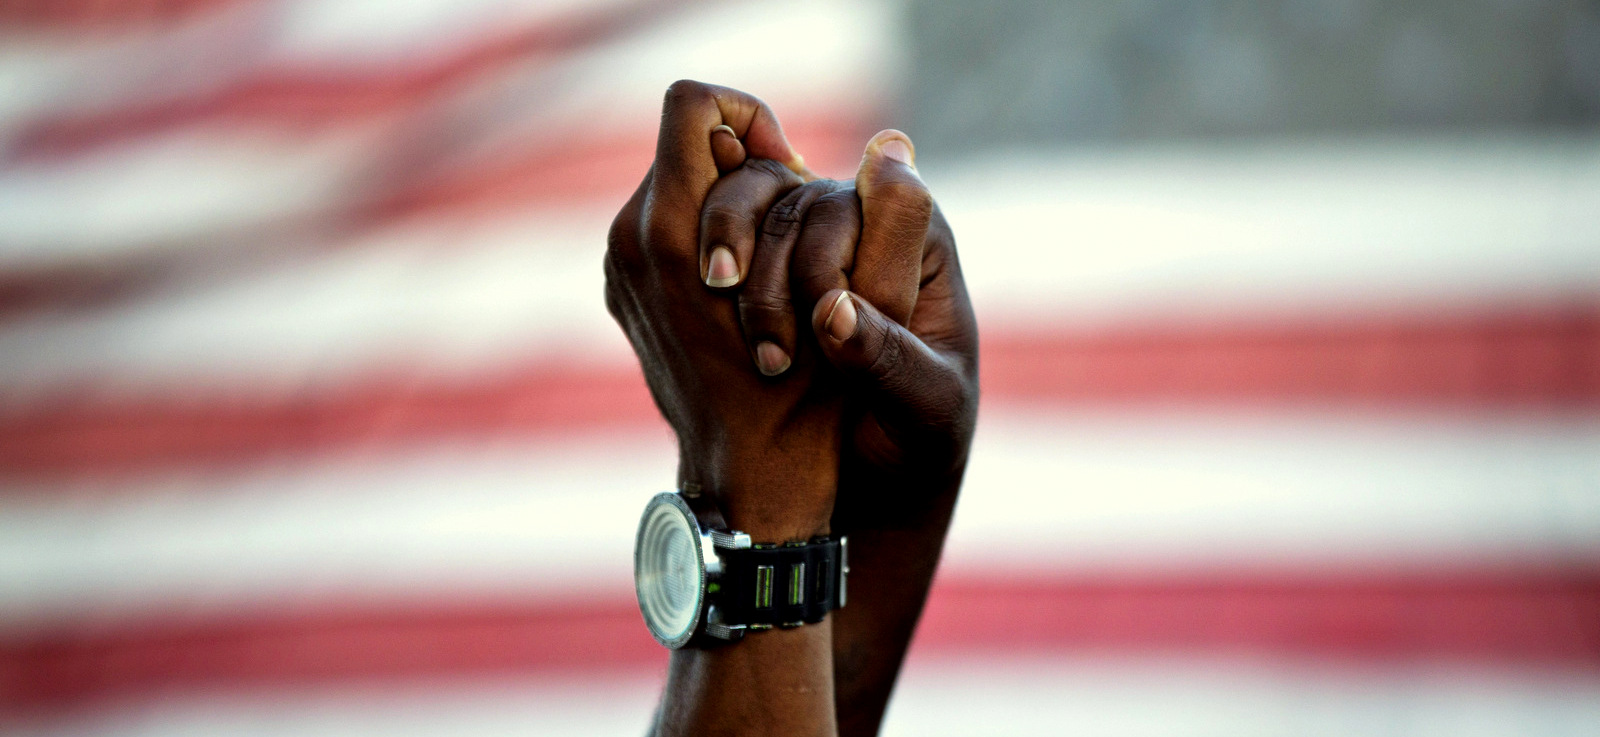 People join hands against the backdrop of an American flag as thousands of marchers meet in the middle of Charleston's main bridge in a show of unity after nine black church parishioners were gunned down during a Bible study, Sunday, June 21, 2015, in Charleston, S.C. (AP Photo/David Goldman)